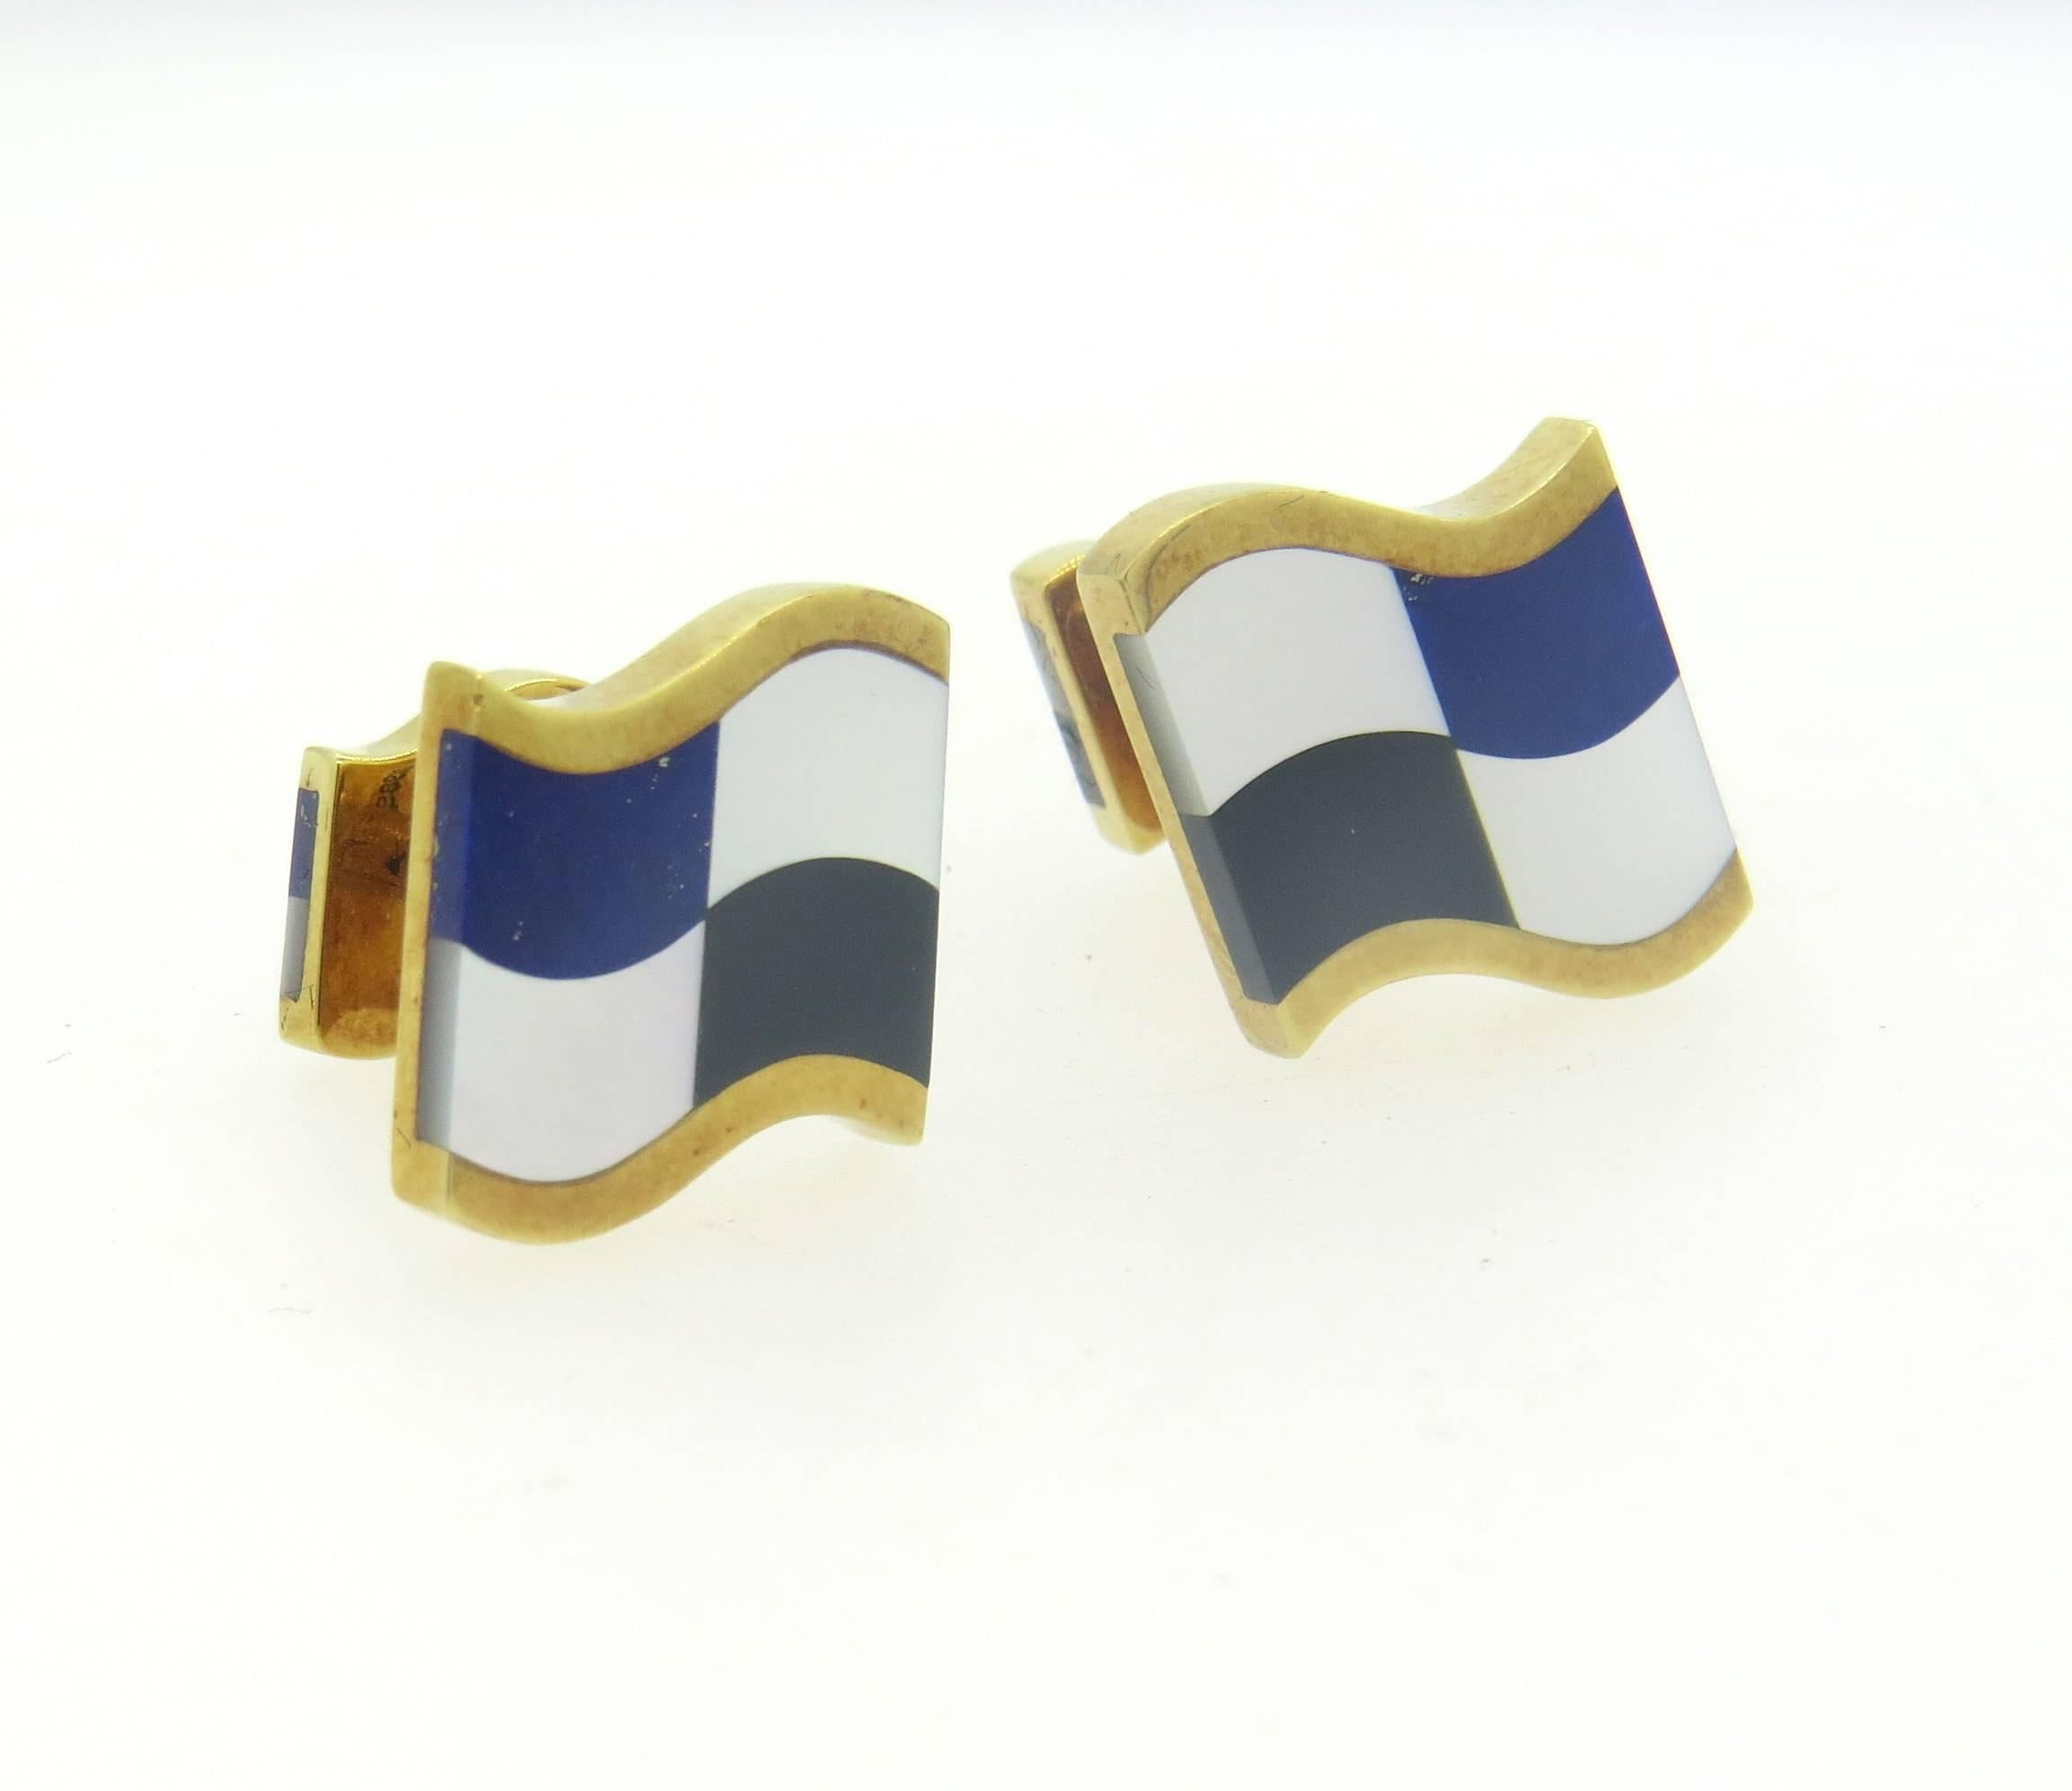 Pair of 18k yellow gold cufflinks, crafted by Tiffany 7 Co in circa 1989, featuring inlay mother of pearl, onyx and lapis lazuli. Top measures 16mm x 16mm. Marked 1989, T & Co, 18k. Weight - 12.4 grams
Come with Tiffany & Co box.